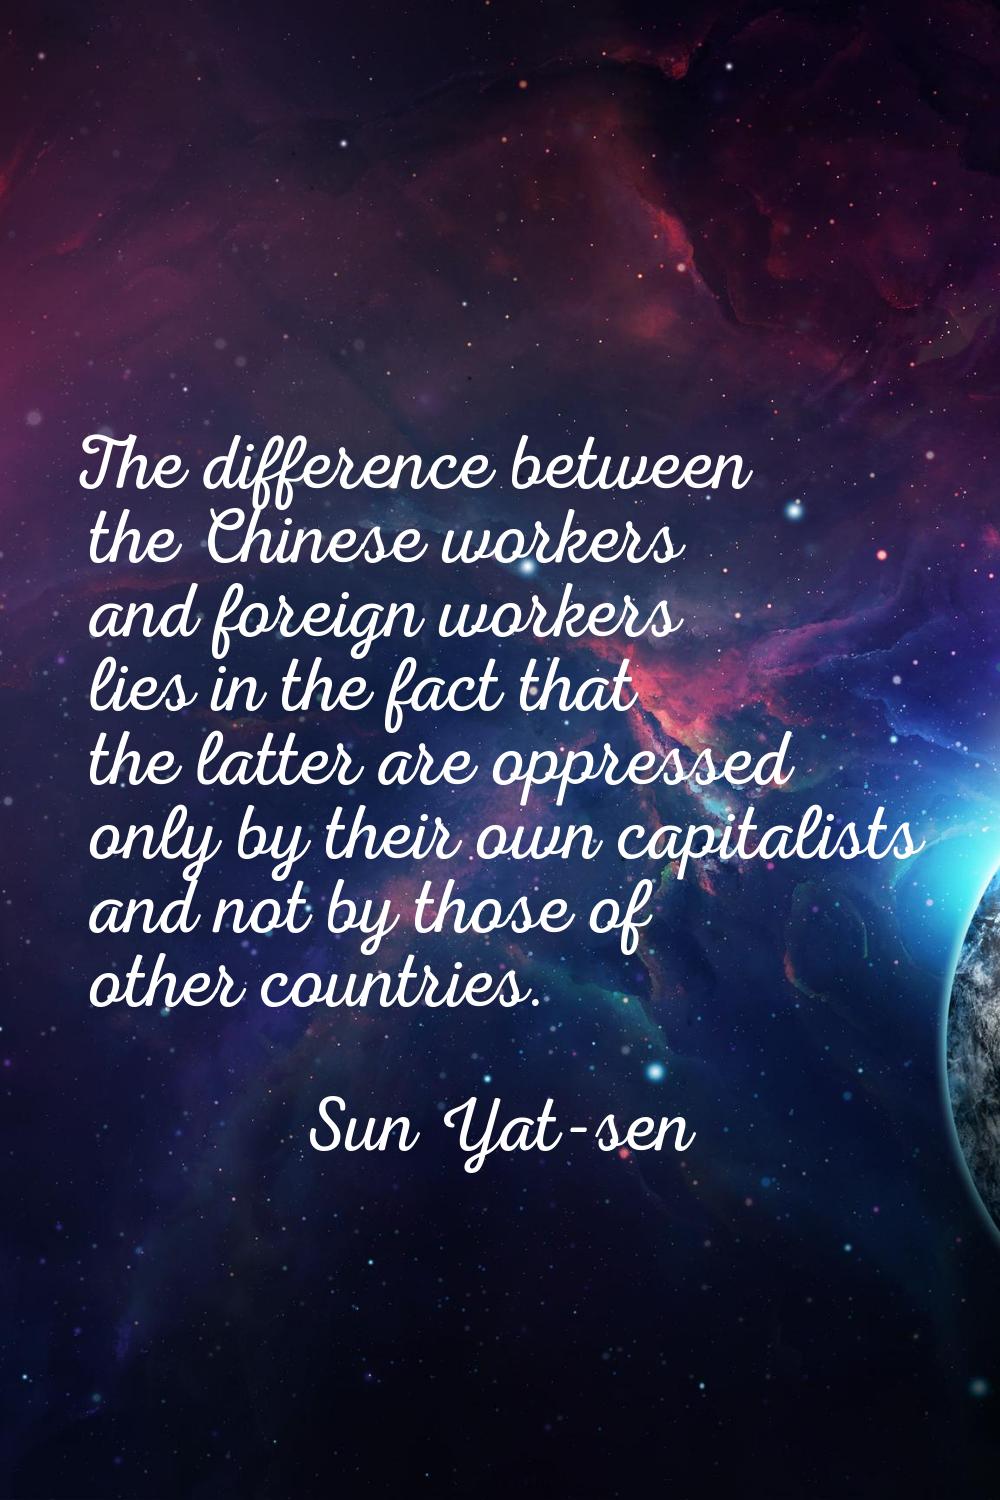 The difference between the Chinese workers and foreign workers lies in the fact that the latter are